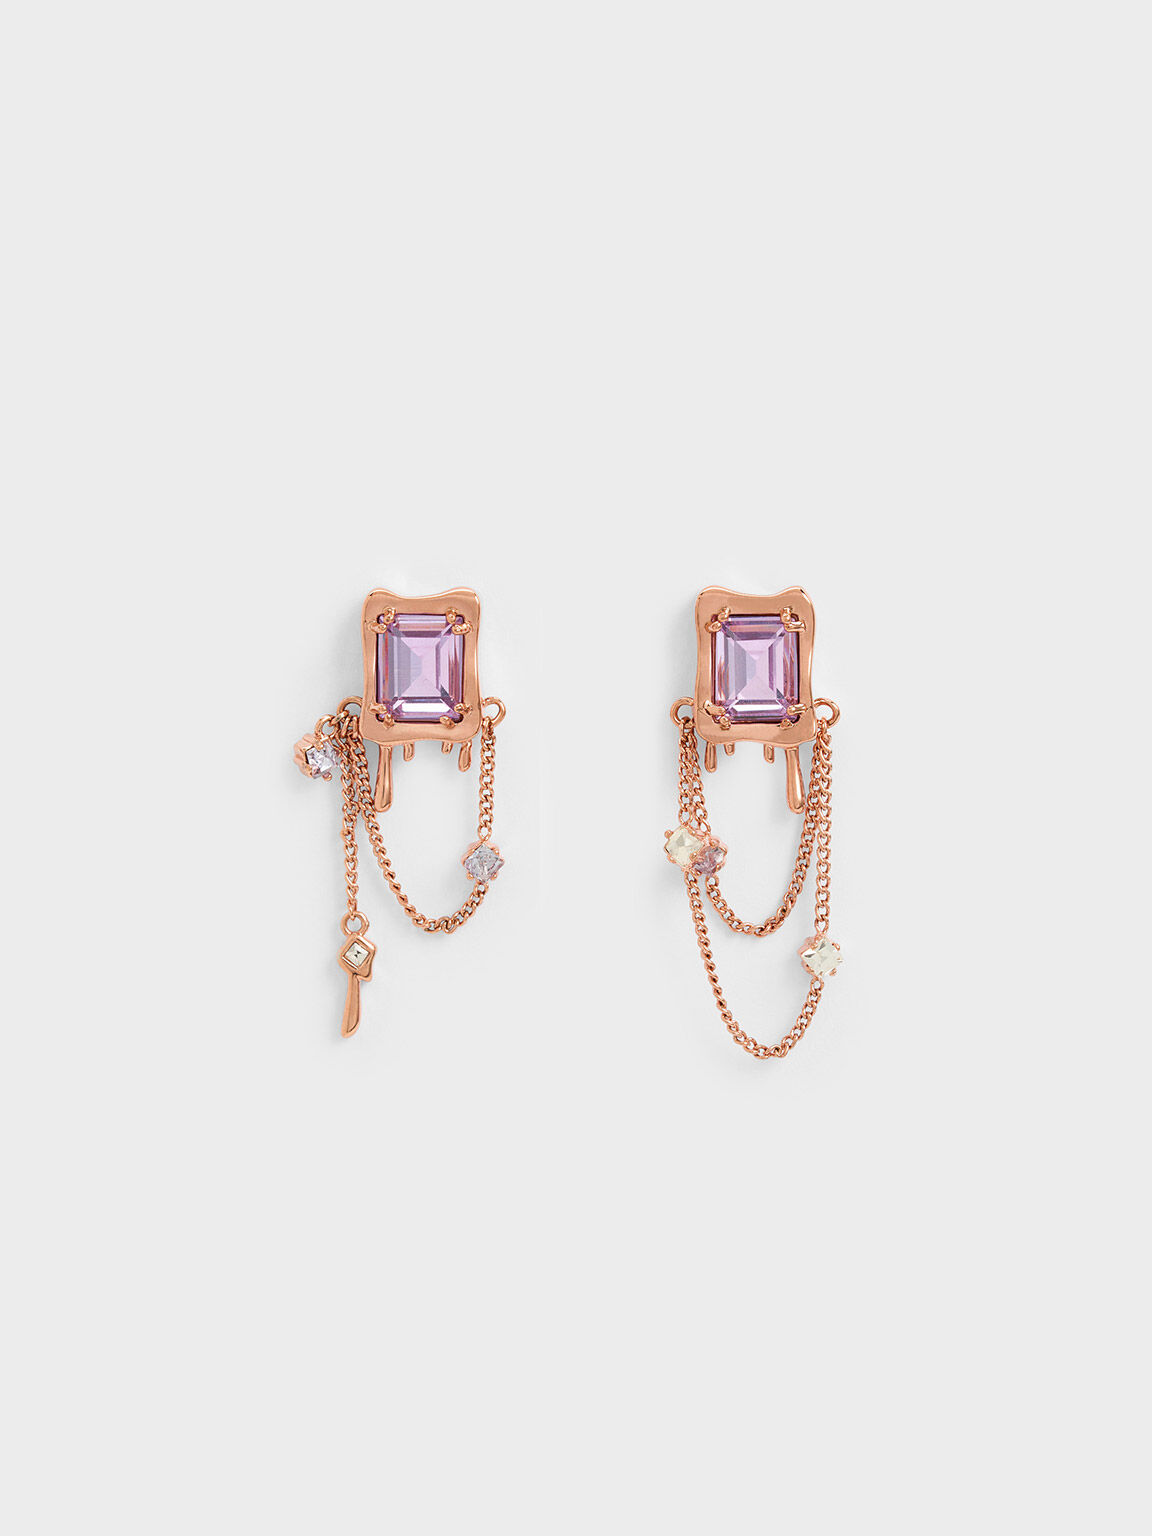 Gold Estelle Star Crystal Mismatch Drop Earrings - CHARLES & KEITH US